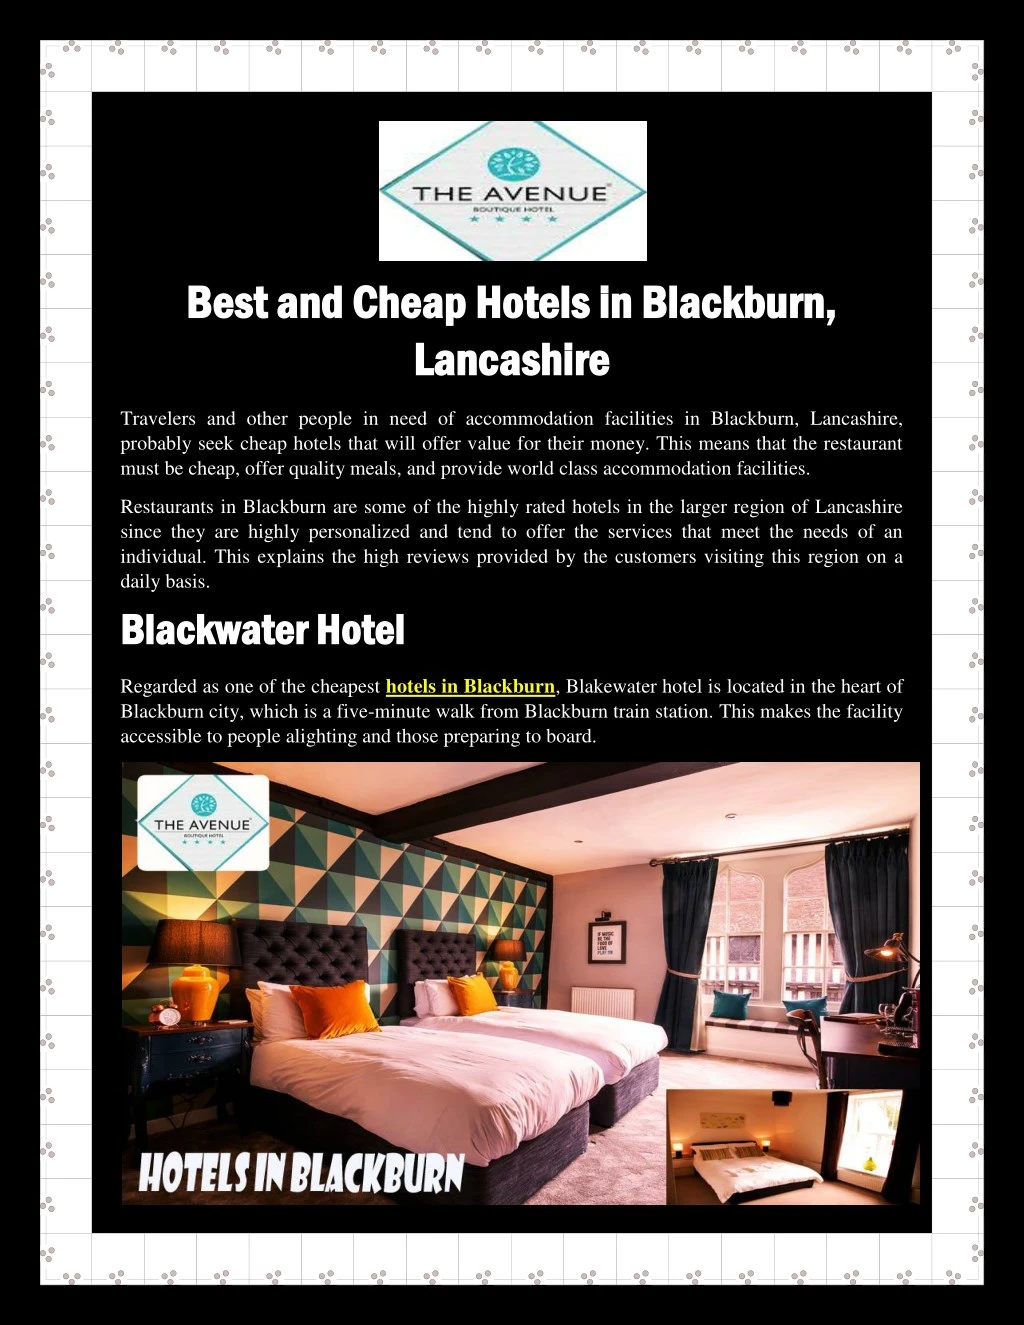 best and cheap hotels in blackburn best and cheap